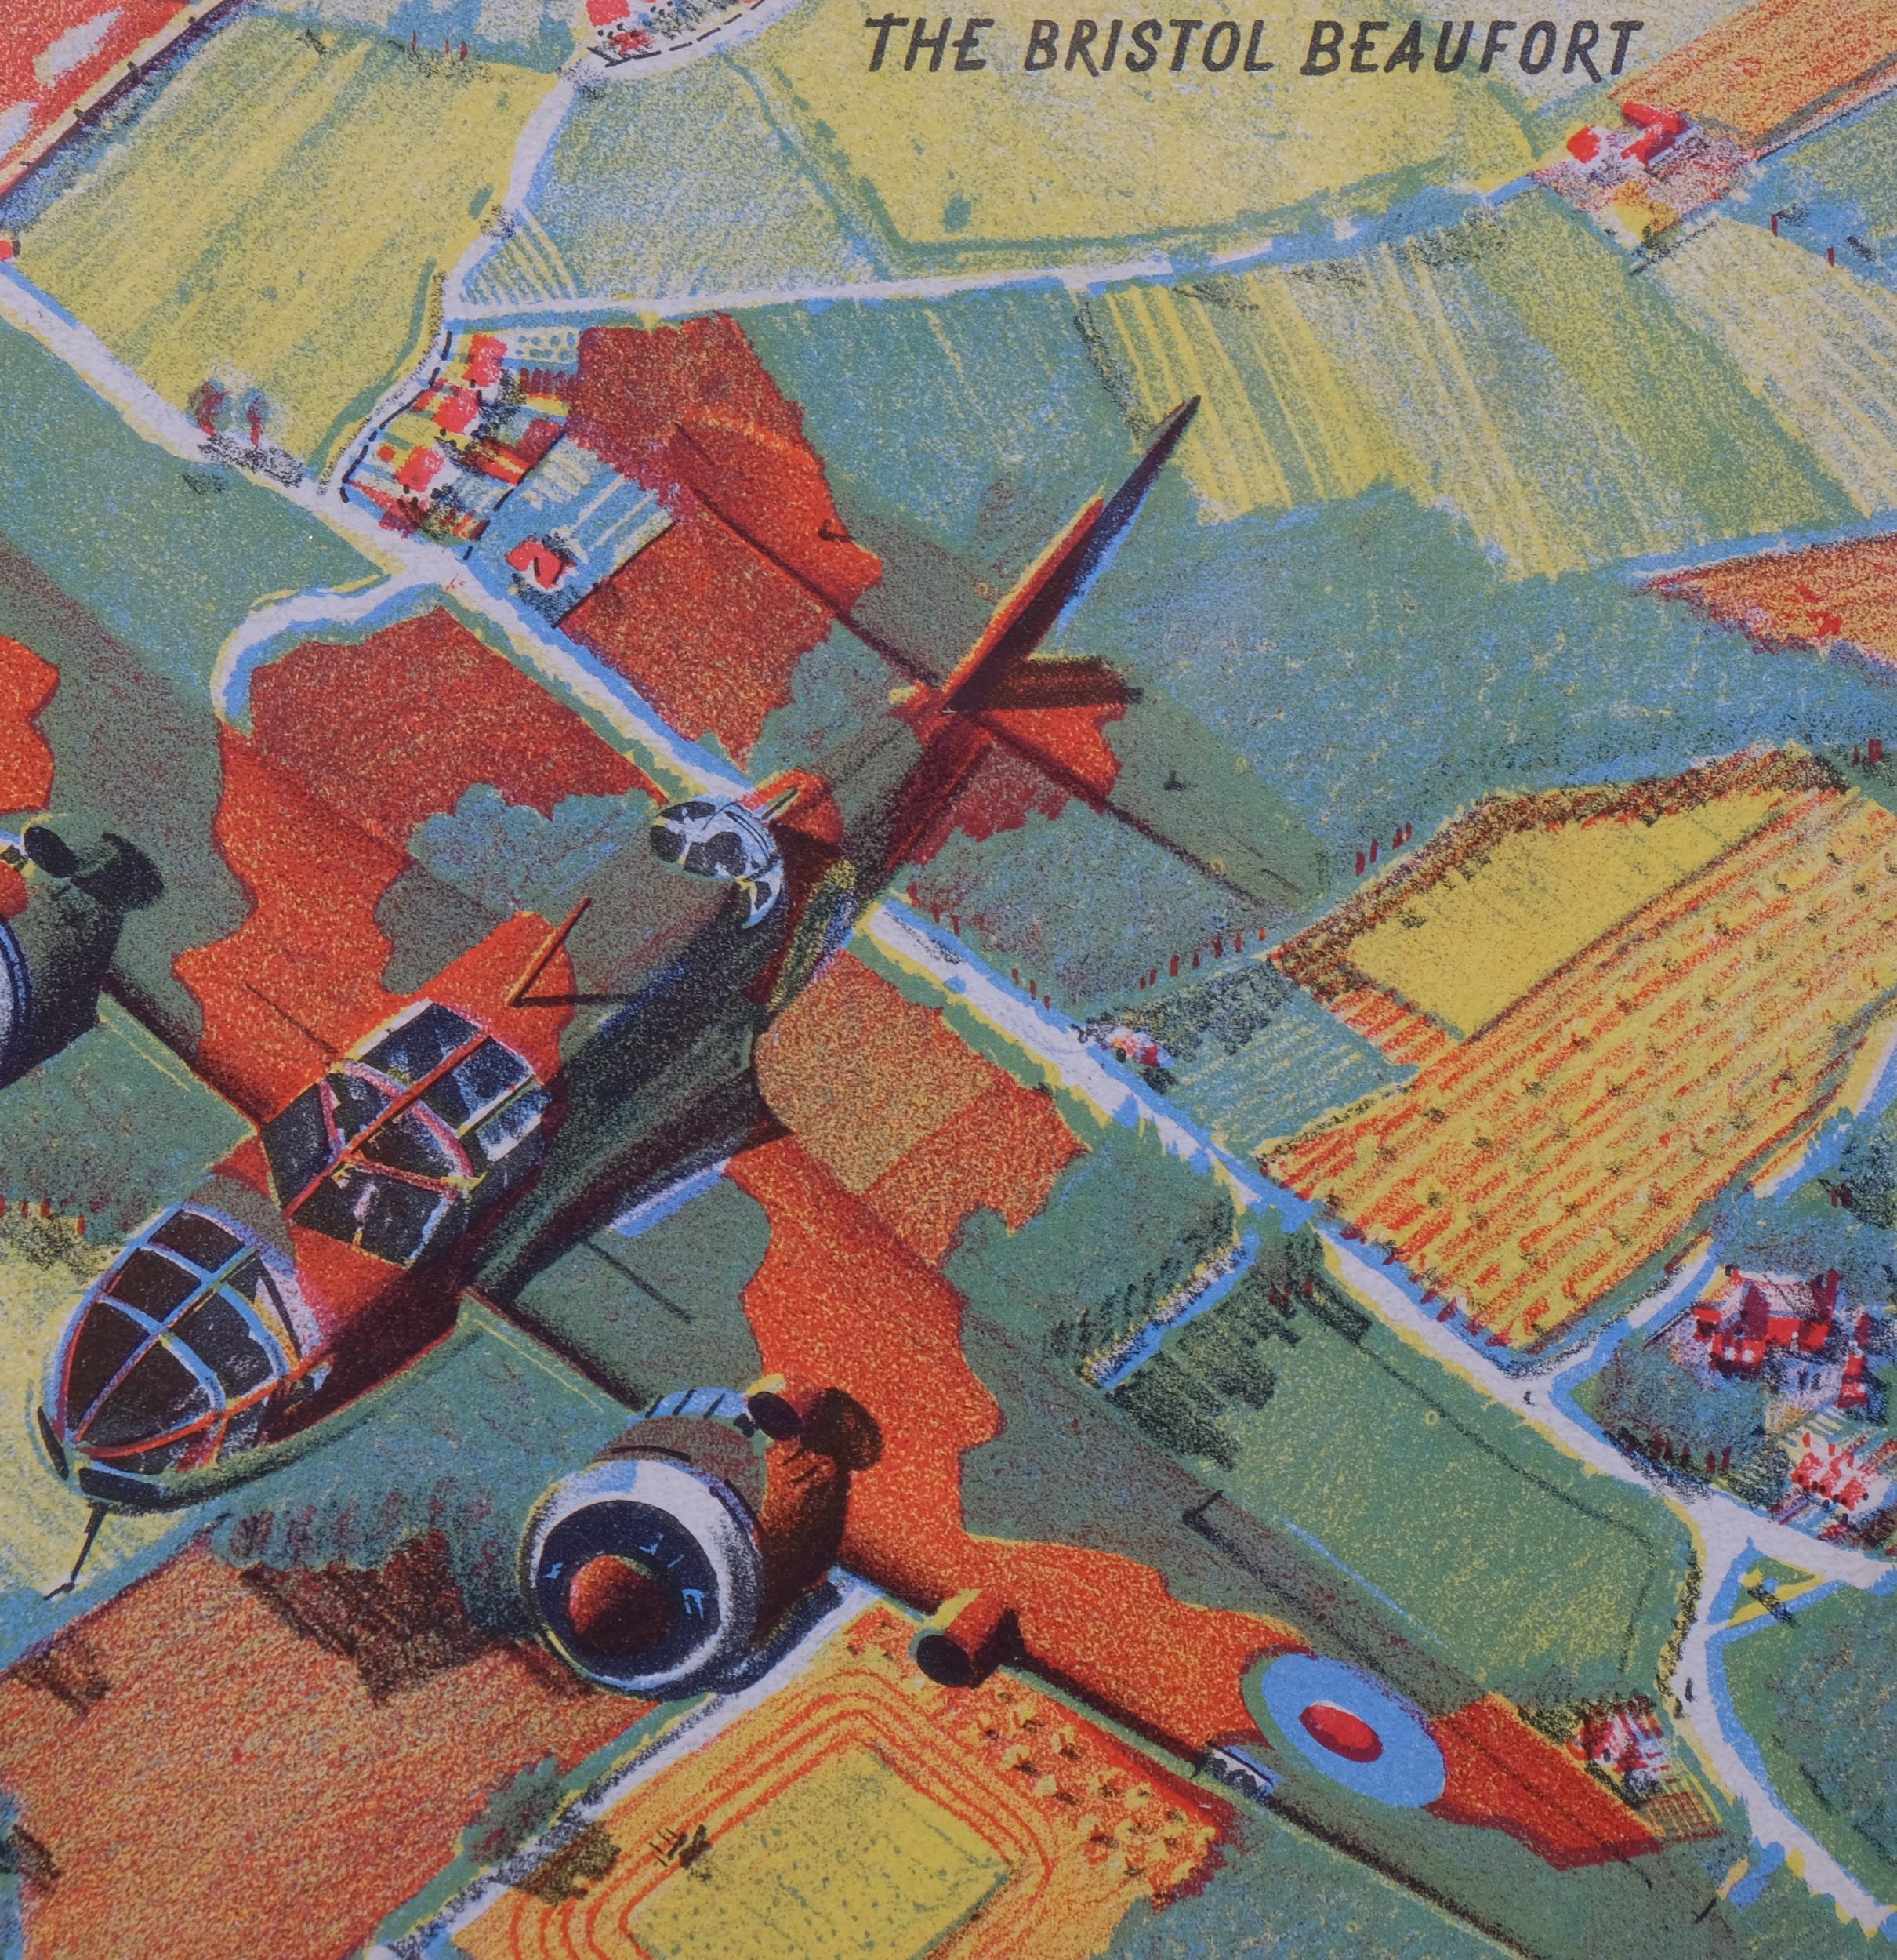 James Gardner (1907-1995), lithograph on paper, The Bristol Beaufort, 17.5cm x 21.5cm, mounted, - Image 3 of 4